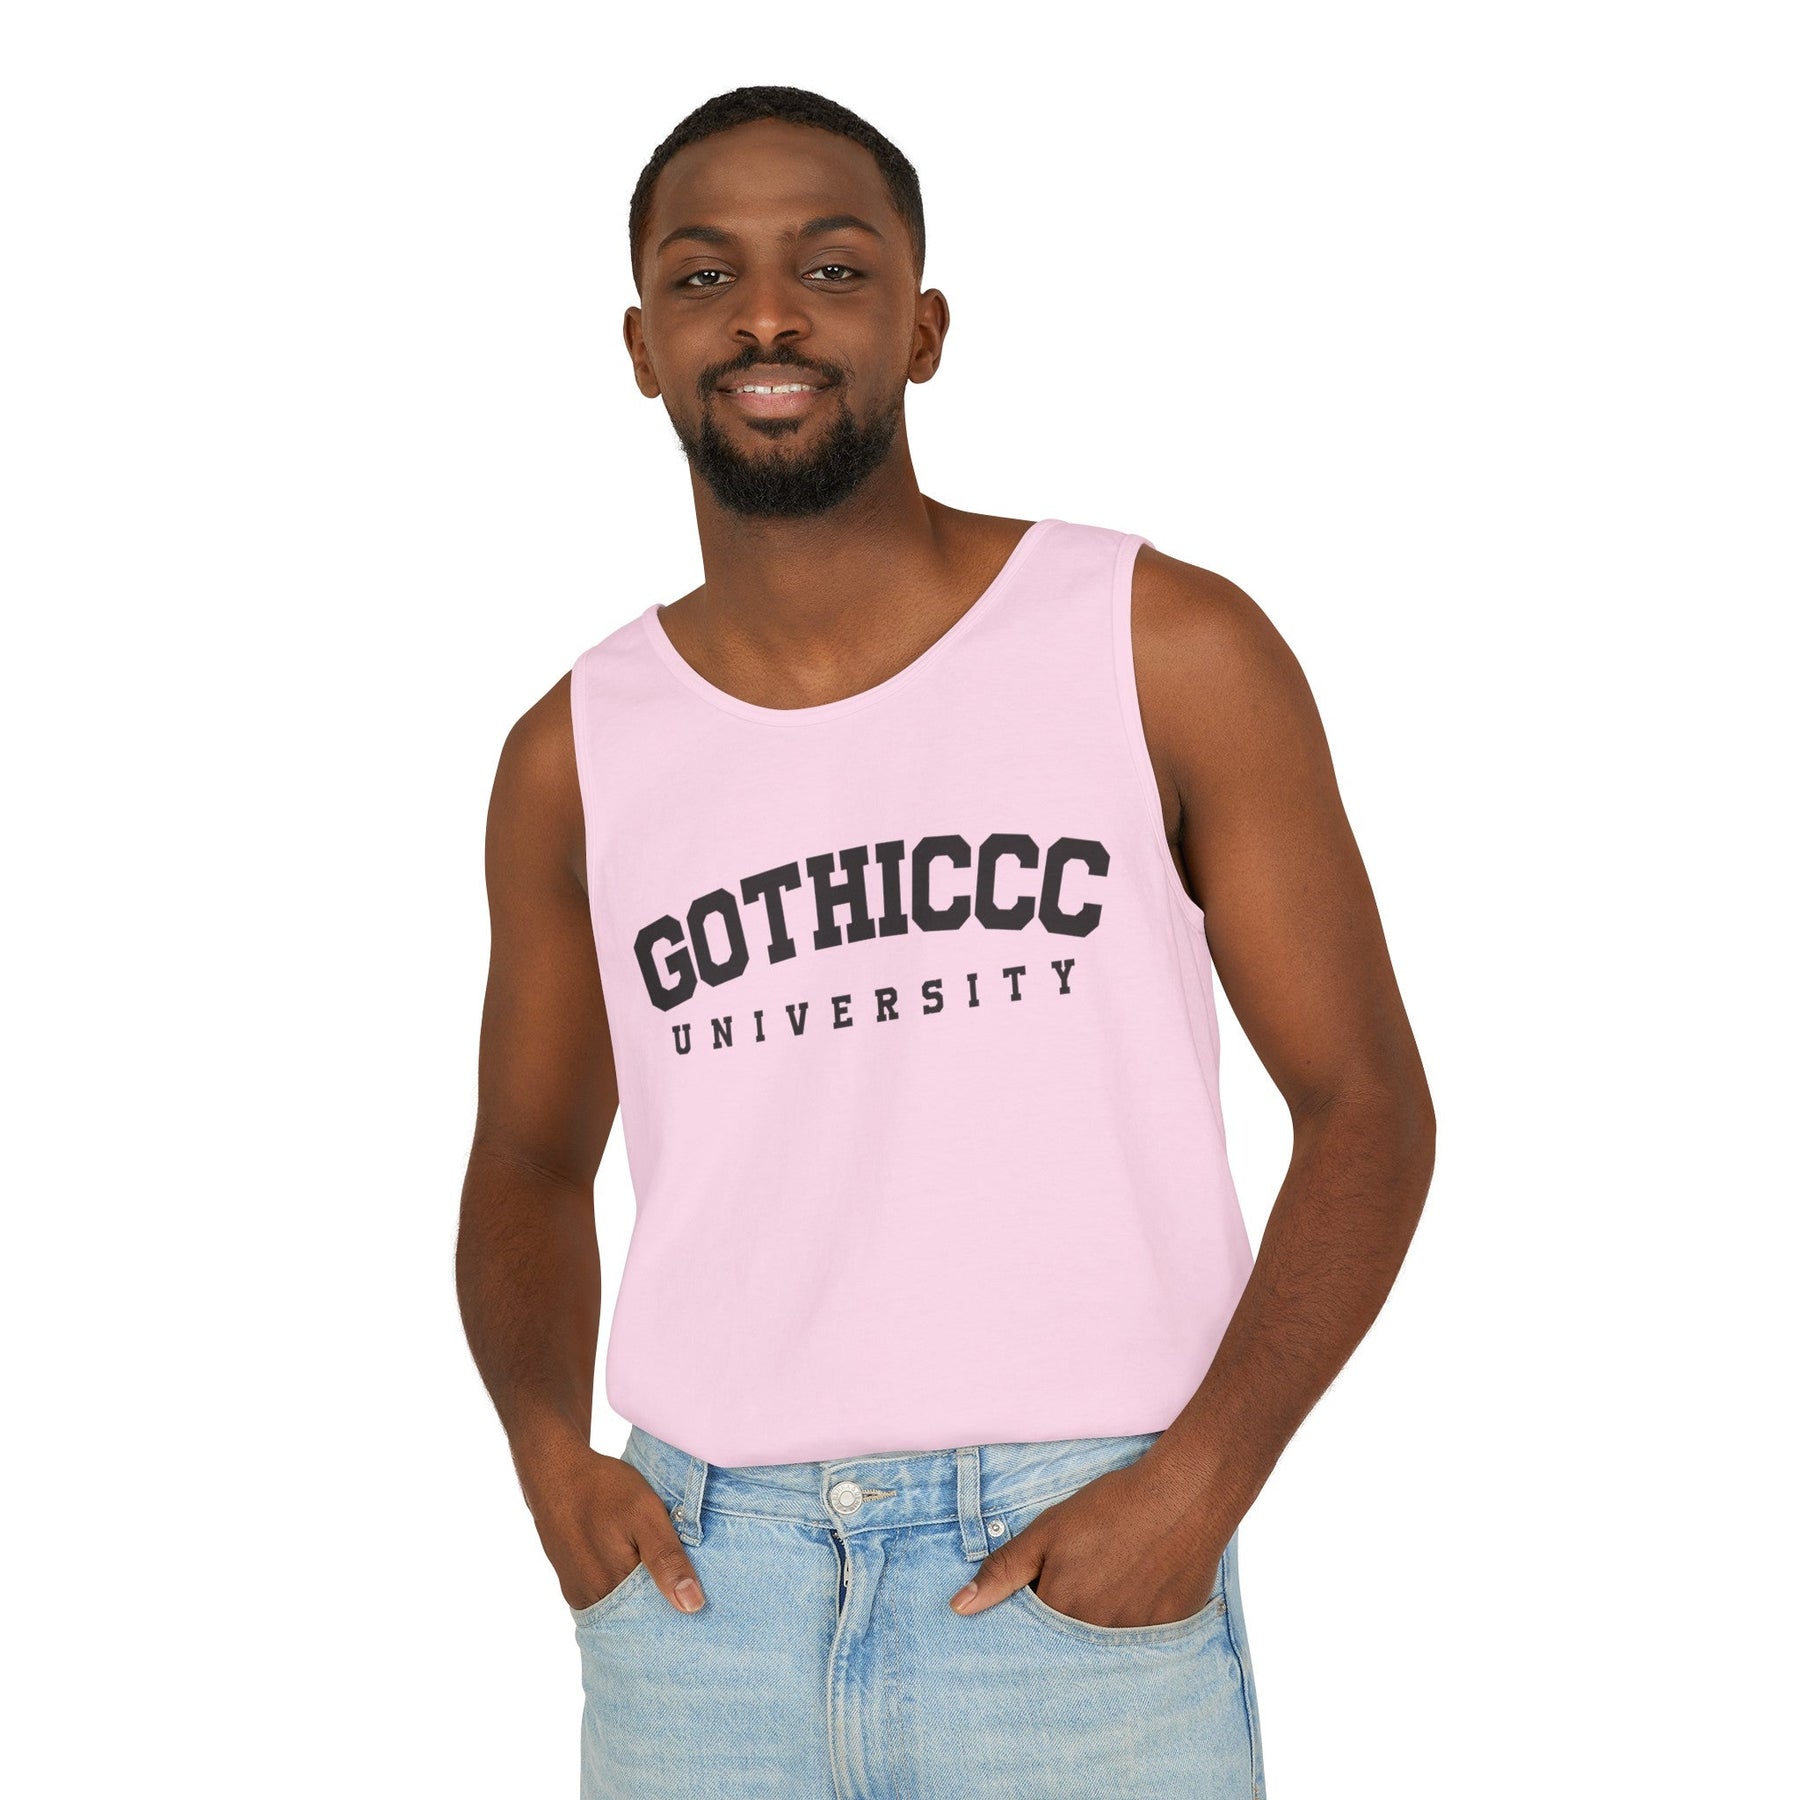 Gothiccc University Unisex Tank Top - Goth Cloth Co.Tank Top25531296736299368957